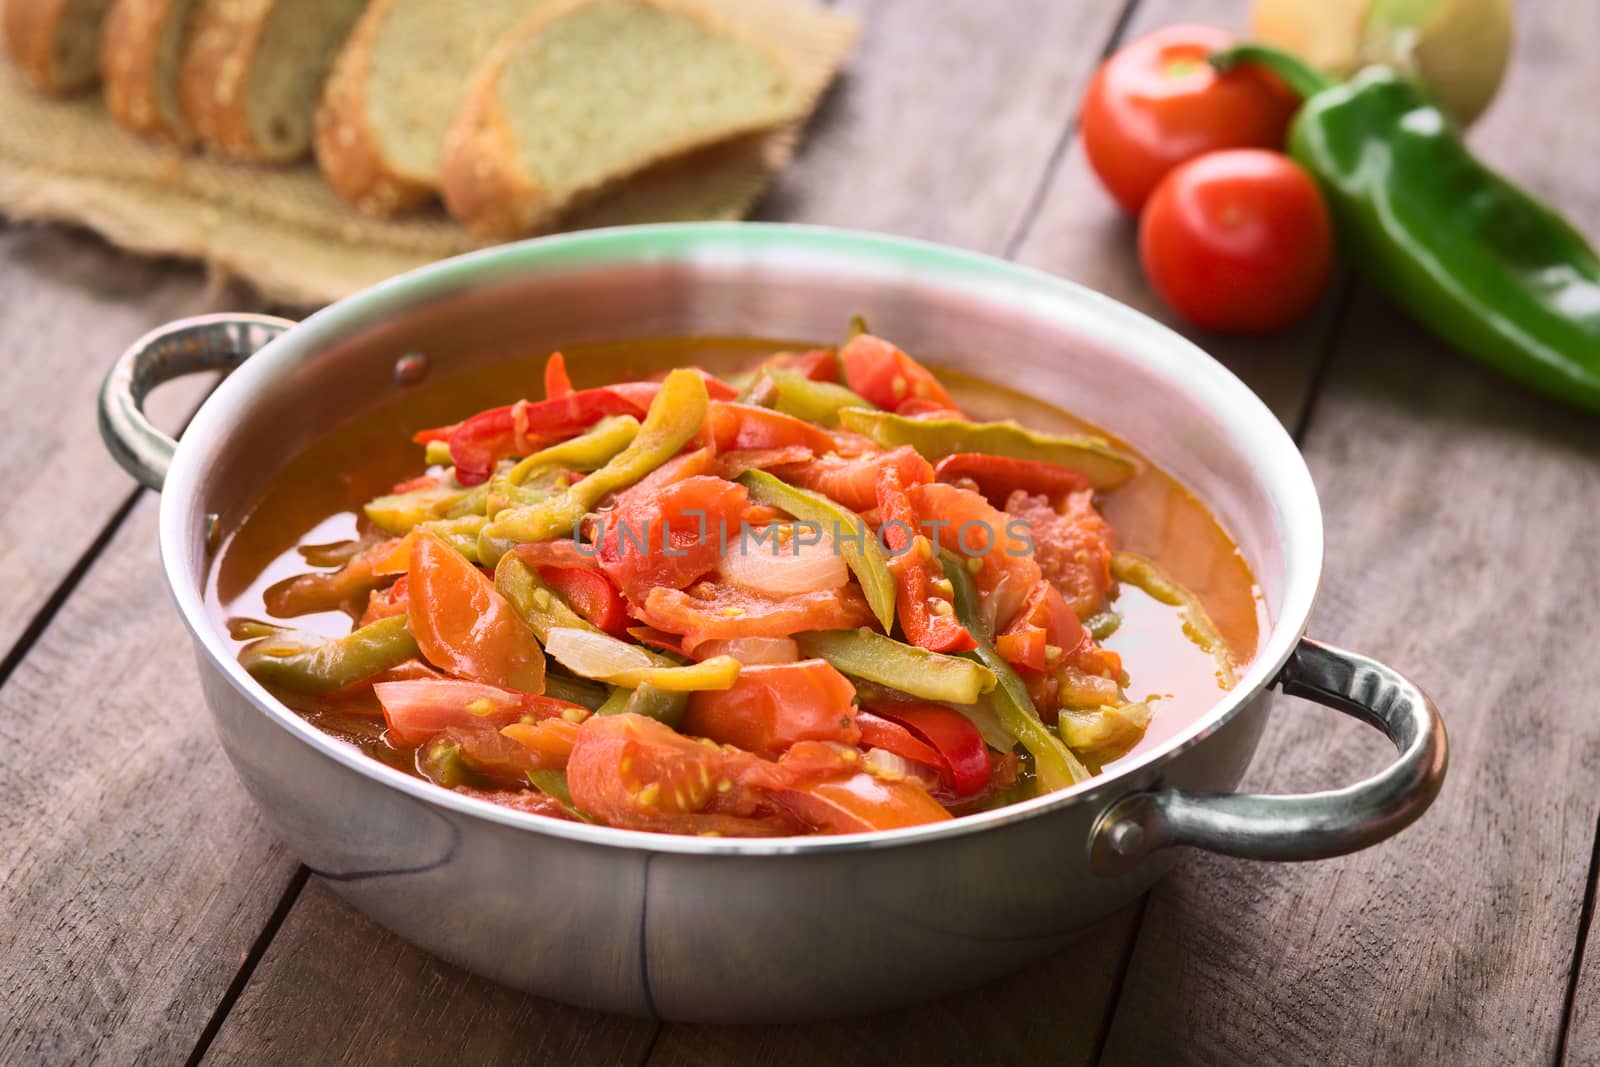 Hungarian traditional dish called Lecso, a vegetarian stew made of onion, pepper and tomato, seasoned with salt and pepper. It can be accompanied by bread or rice (Selective Focus, Focus in the middle of the dish)  